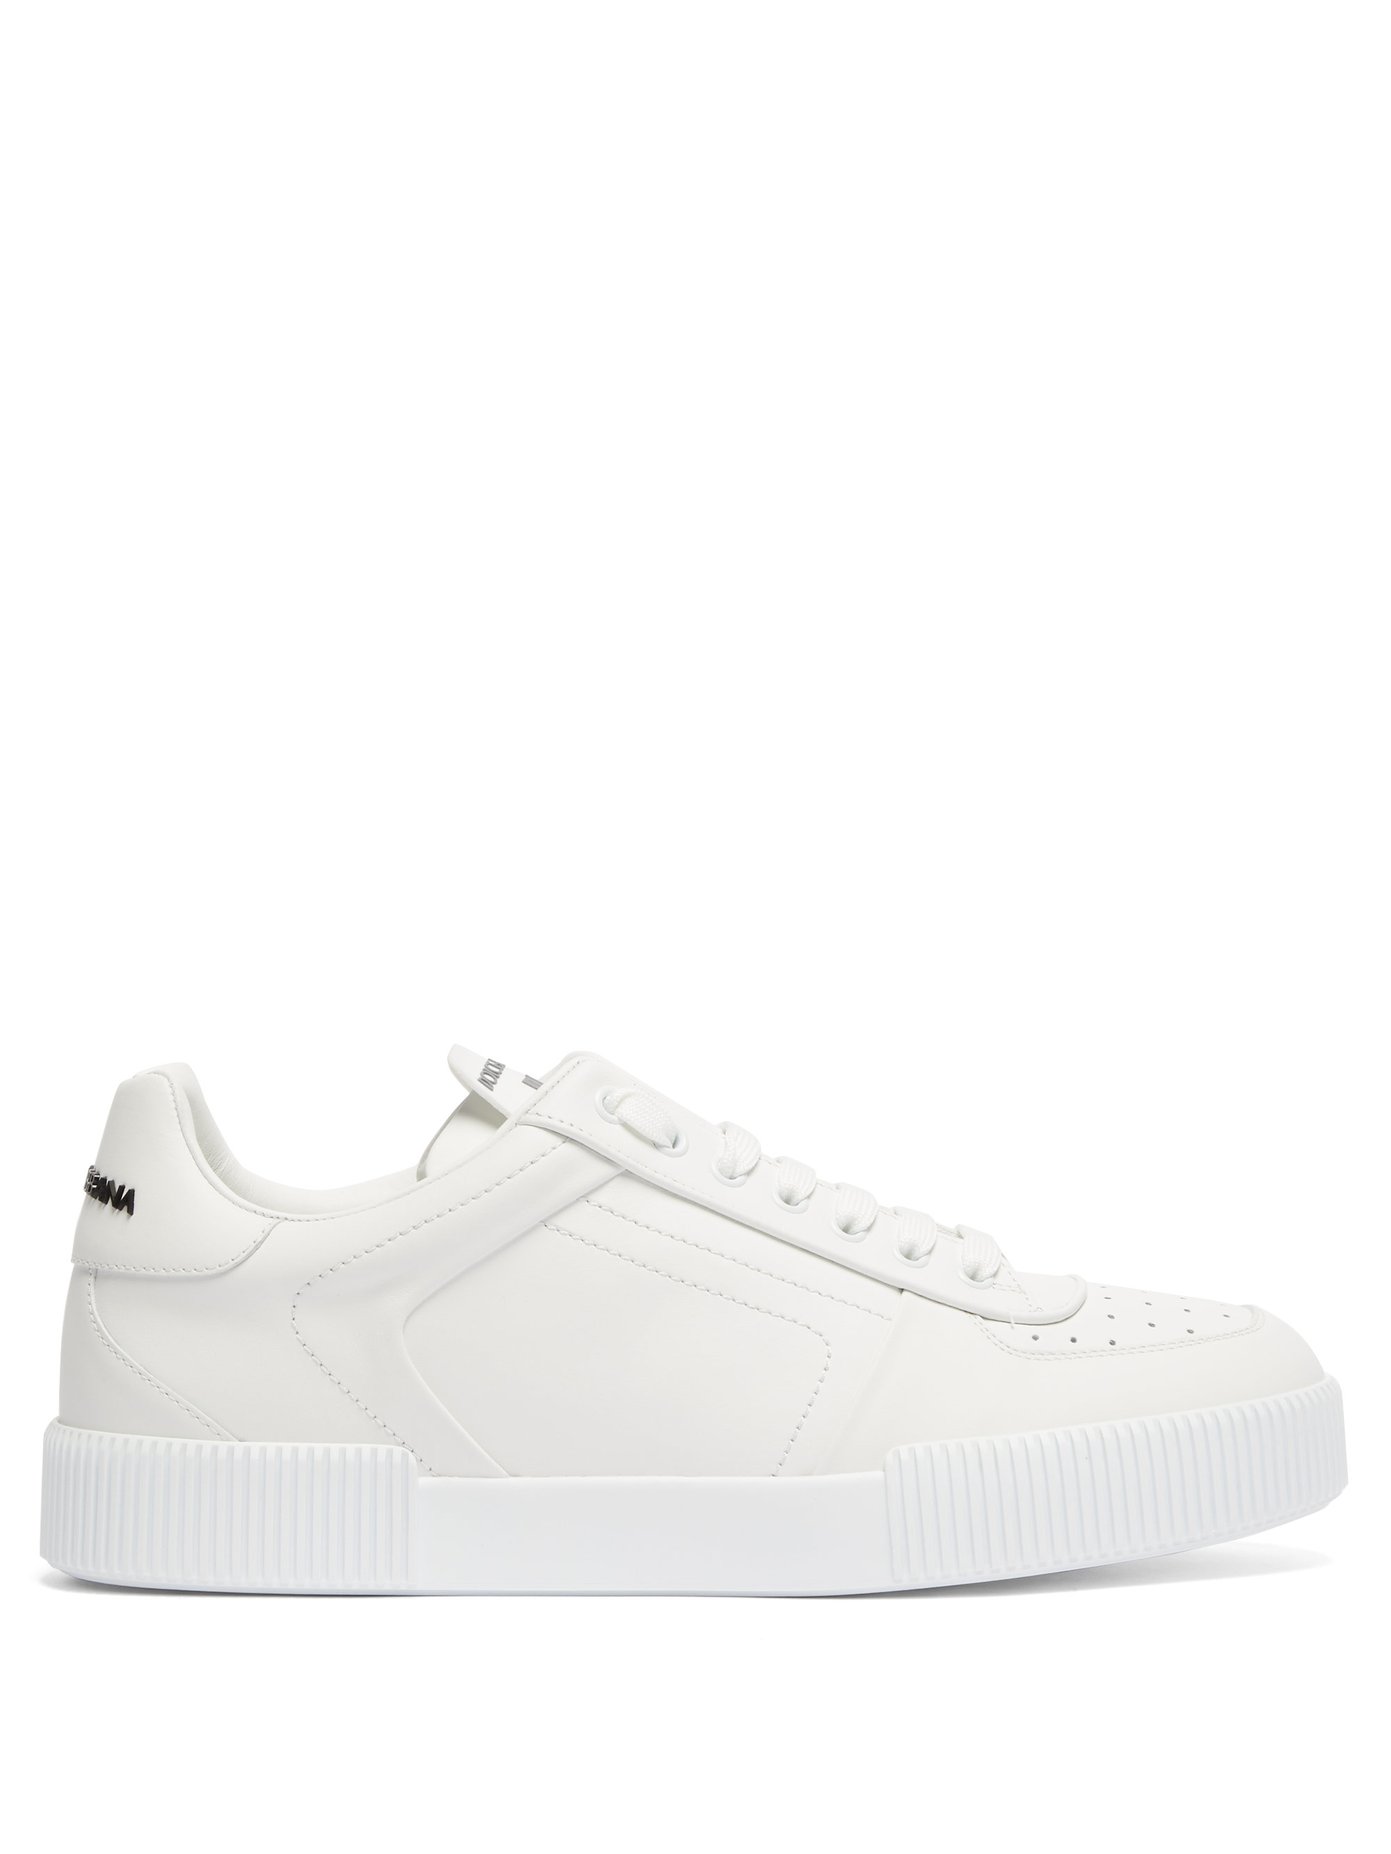 Miami logo leather trainers | Dolce 